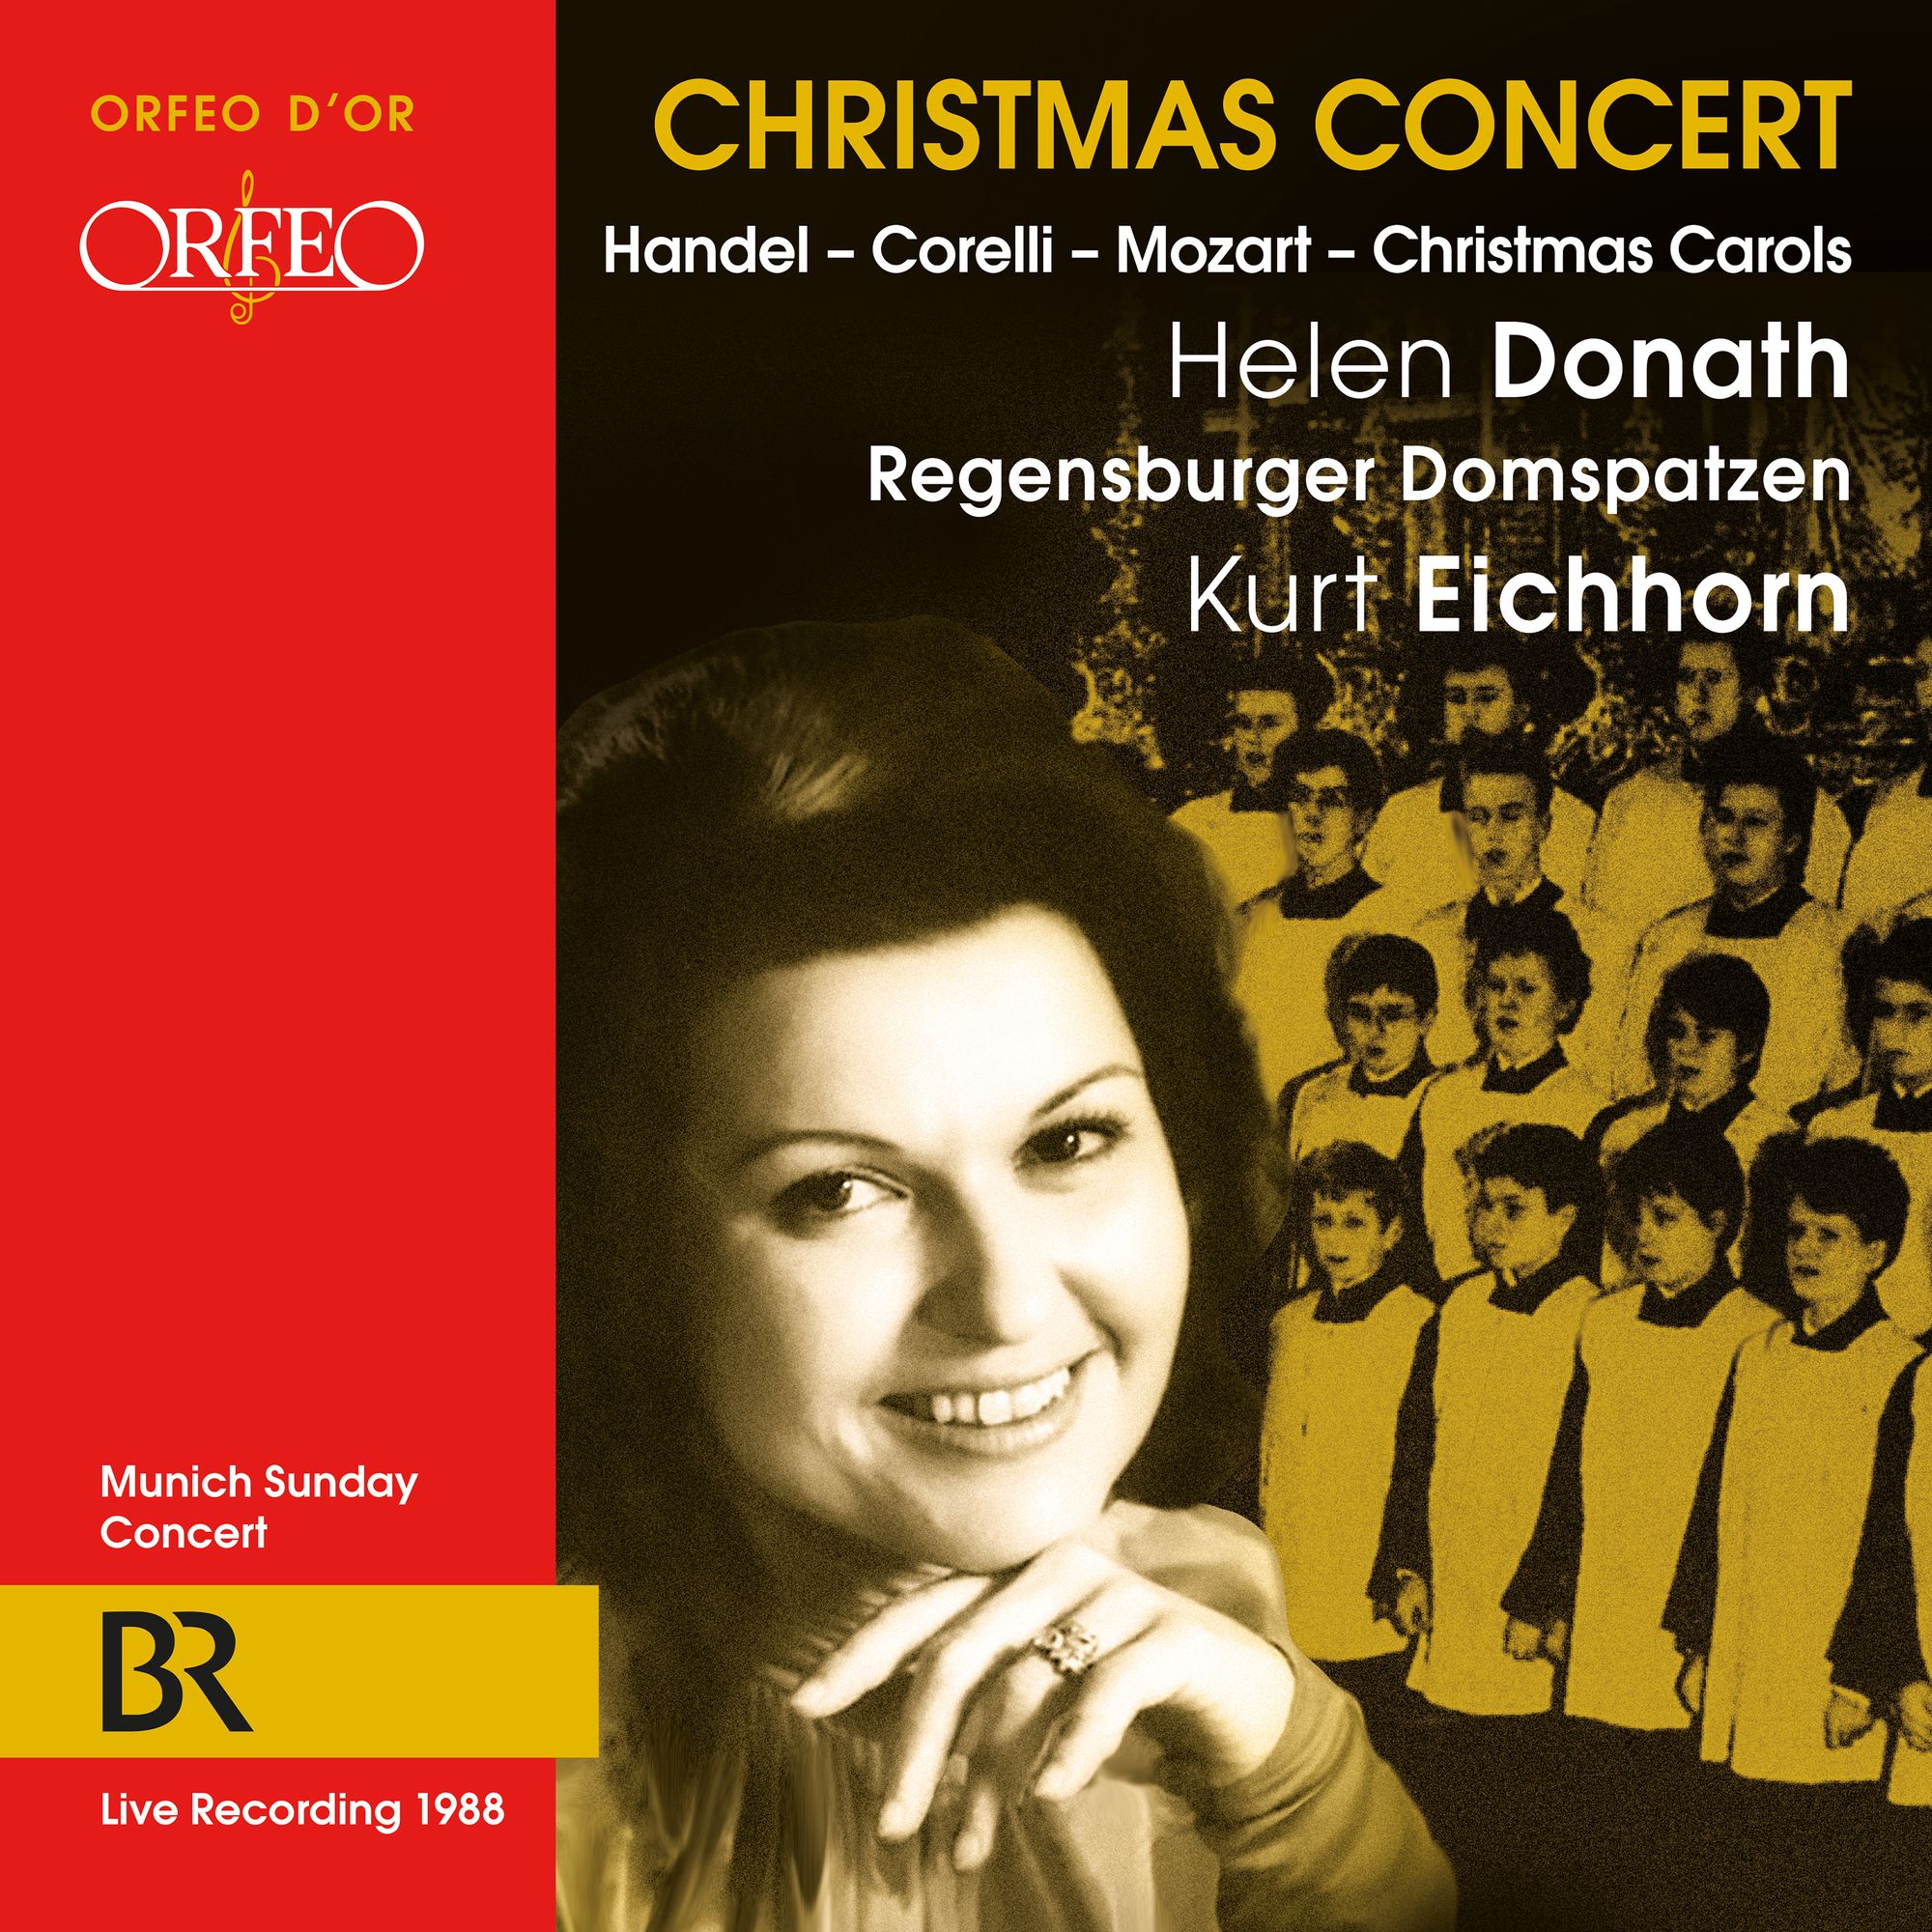 Repost: A Christmas Concert with Helen Donath